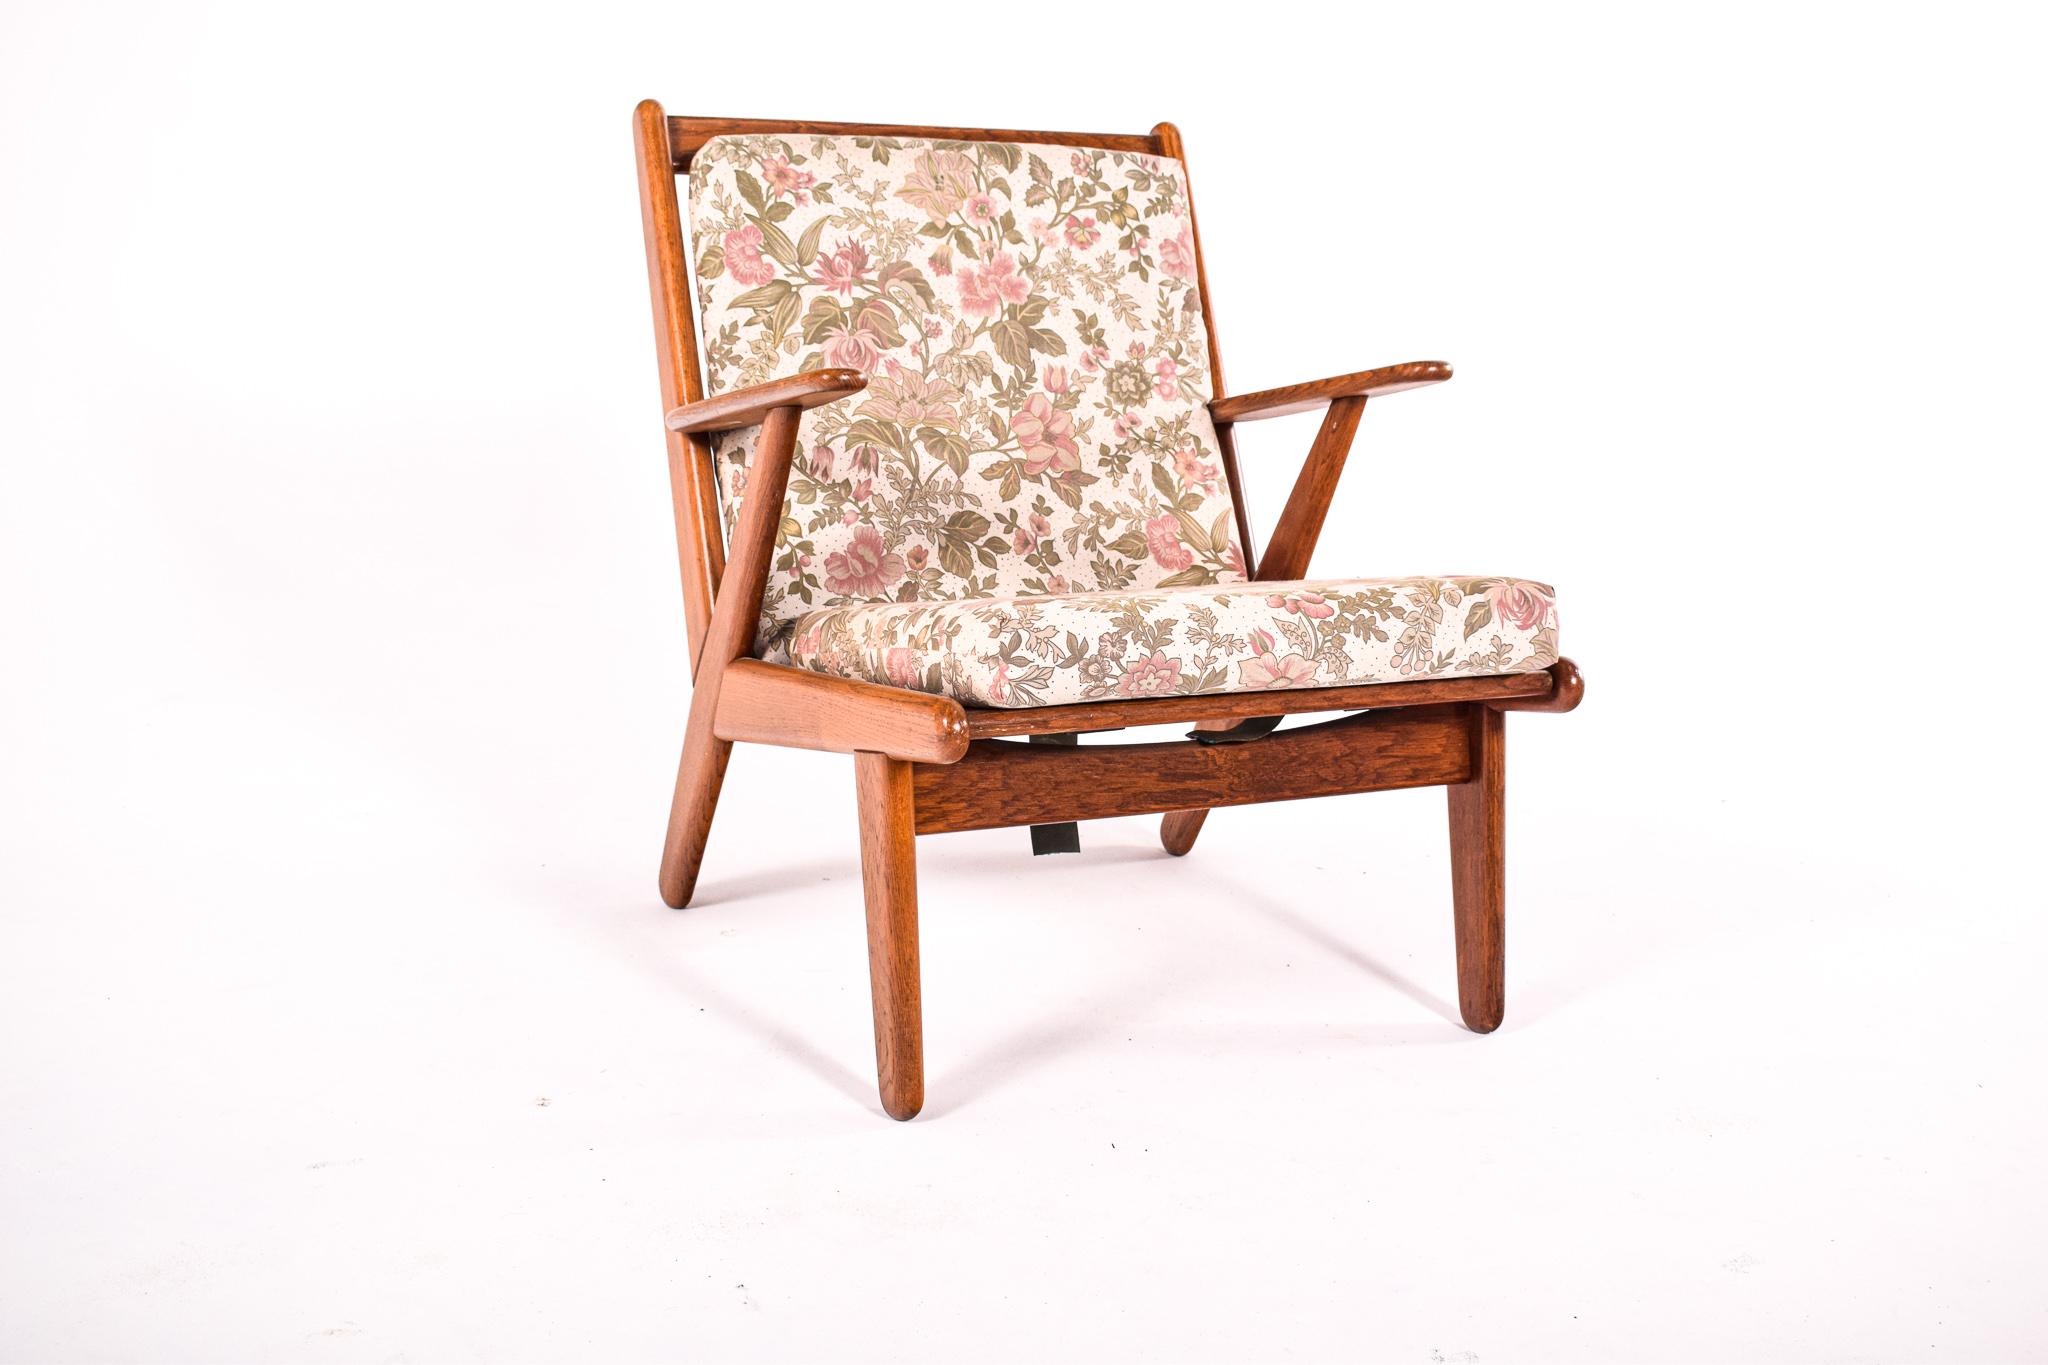 This easy chair, a piece of mid-century design from the 1950s, is crafted from oak, a wood renowned for its strength and durability. The chair's design is quintessentially of its era, featuring a slatted back that provides both support and a